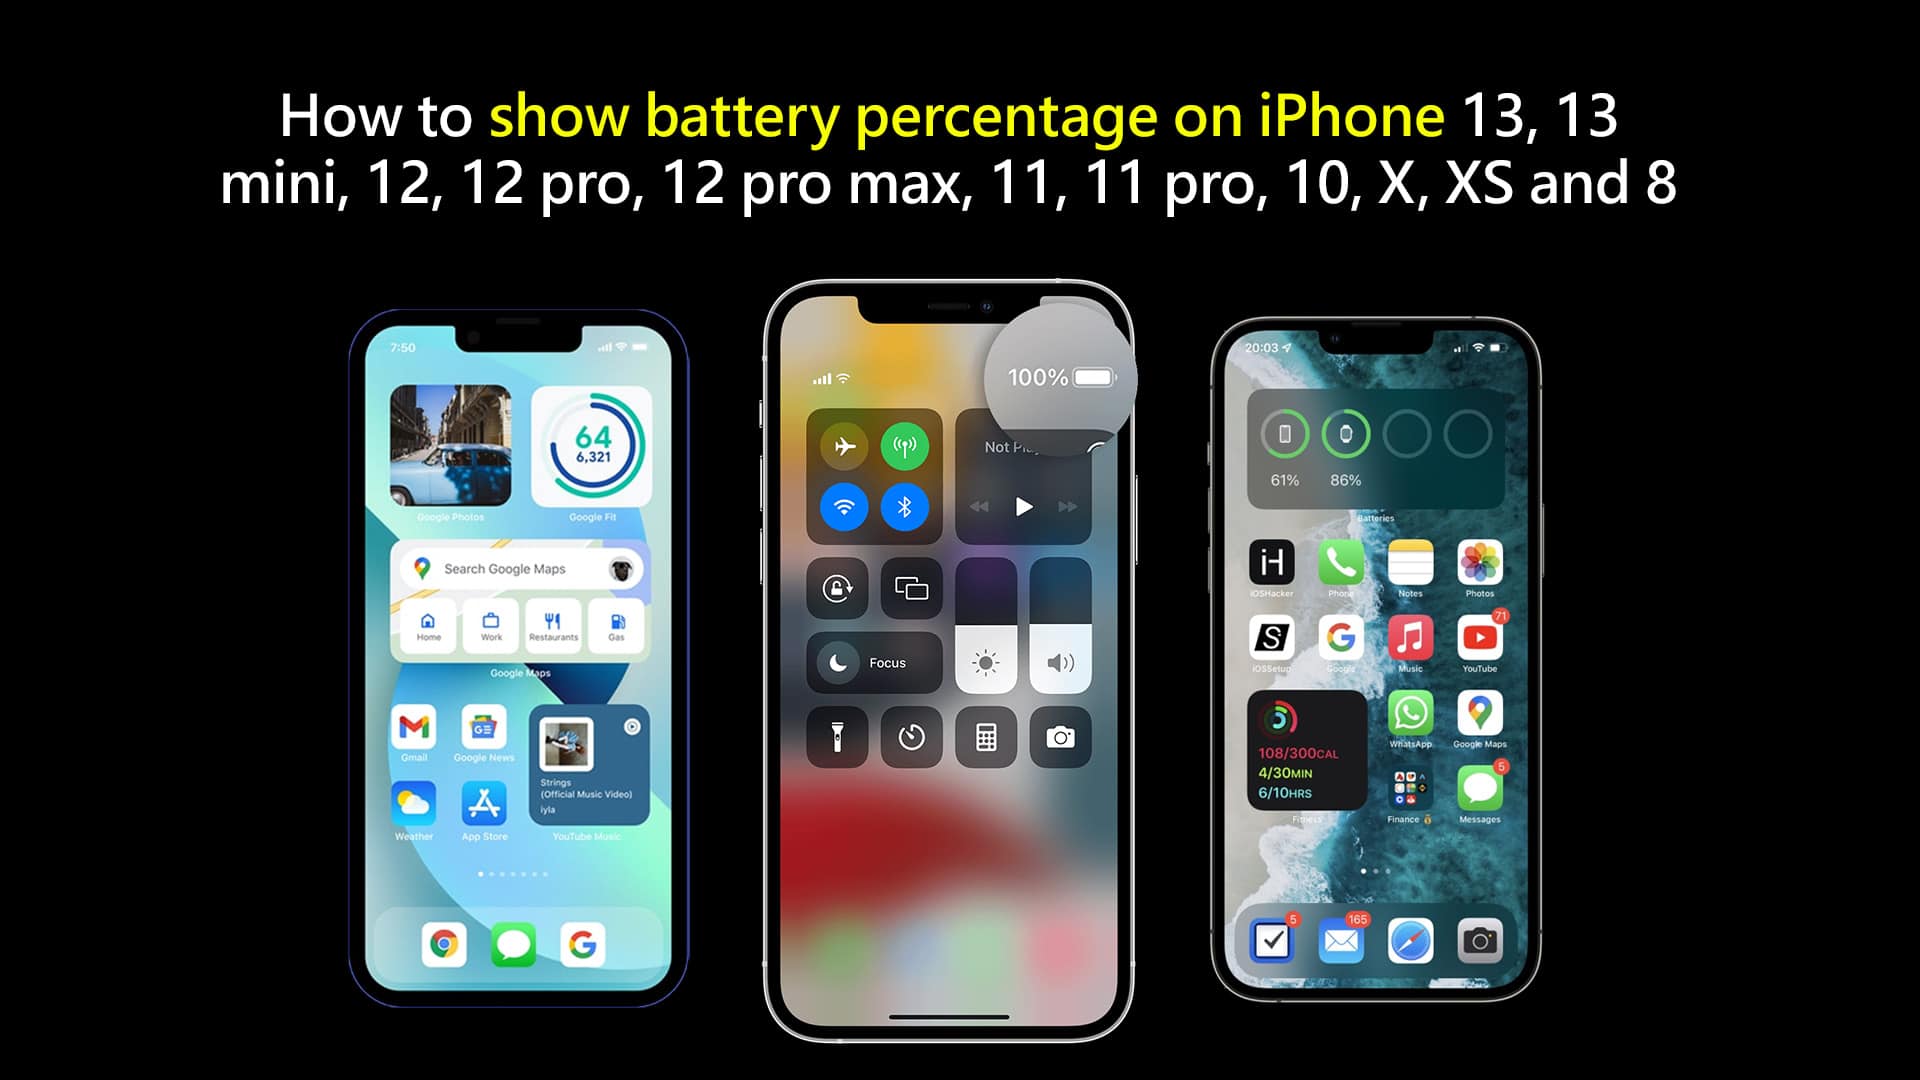 how to show battery percentage on iPhone 13, 13 mini, 12, 12 pro, 12 pro max, 11, 11 pro, 10, X, XS and 8